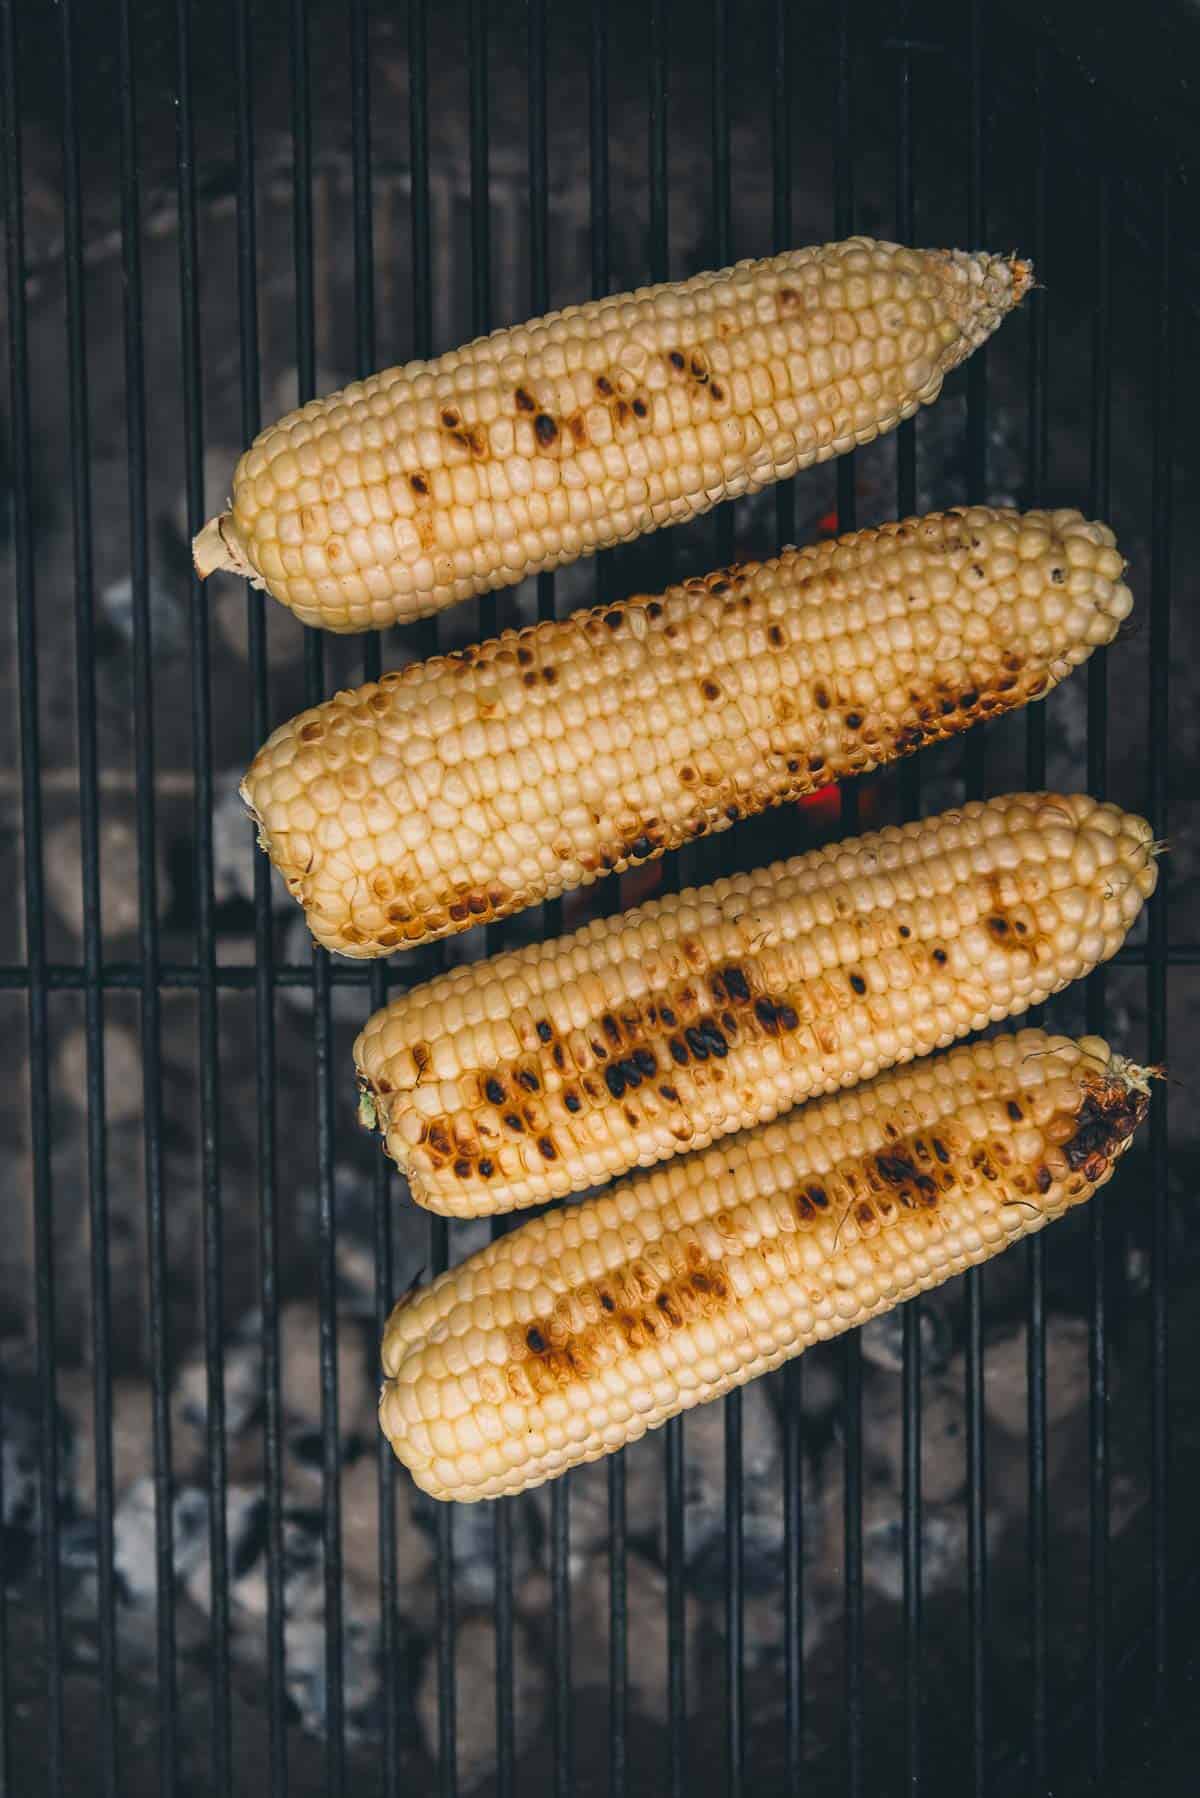 Corn with charred kernels on the grill grates over charcoal. 